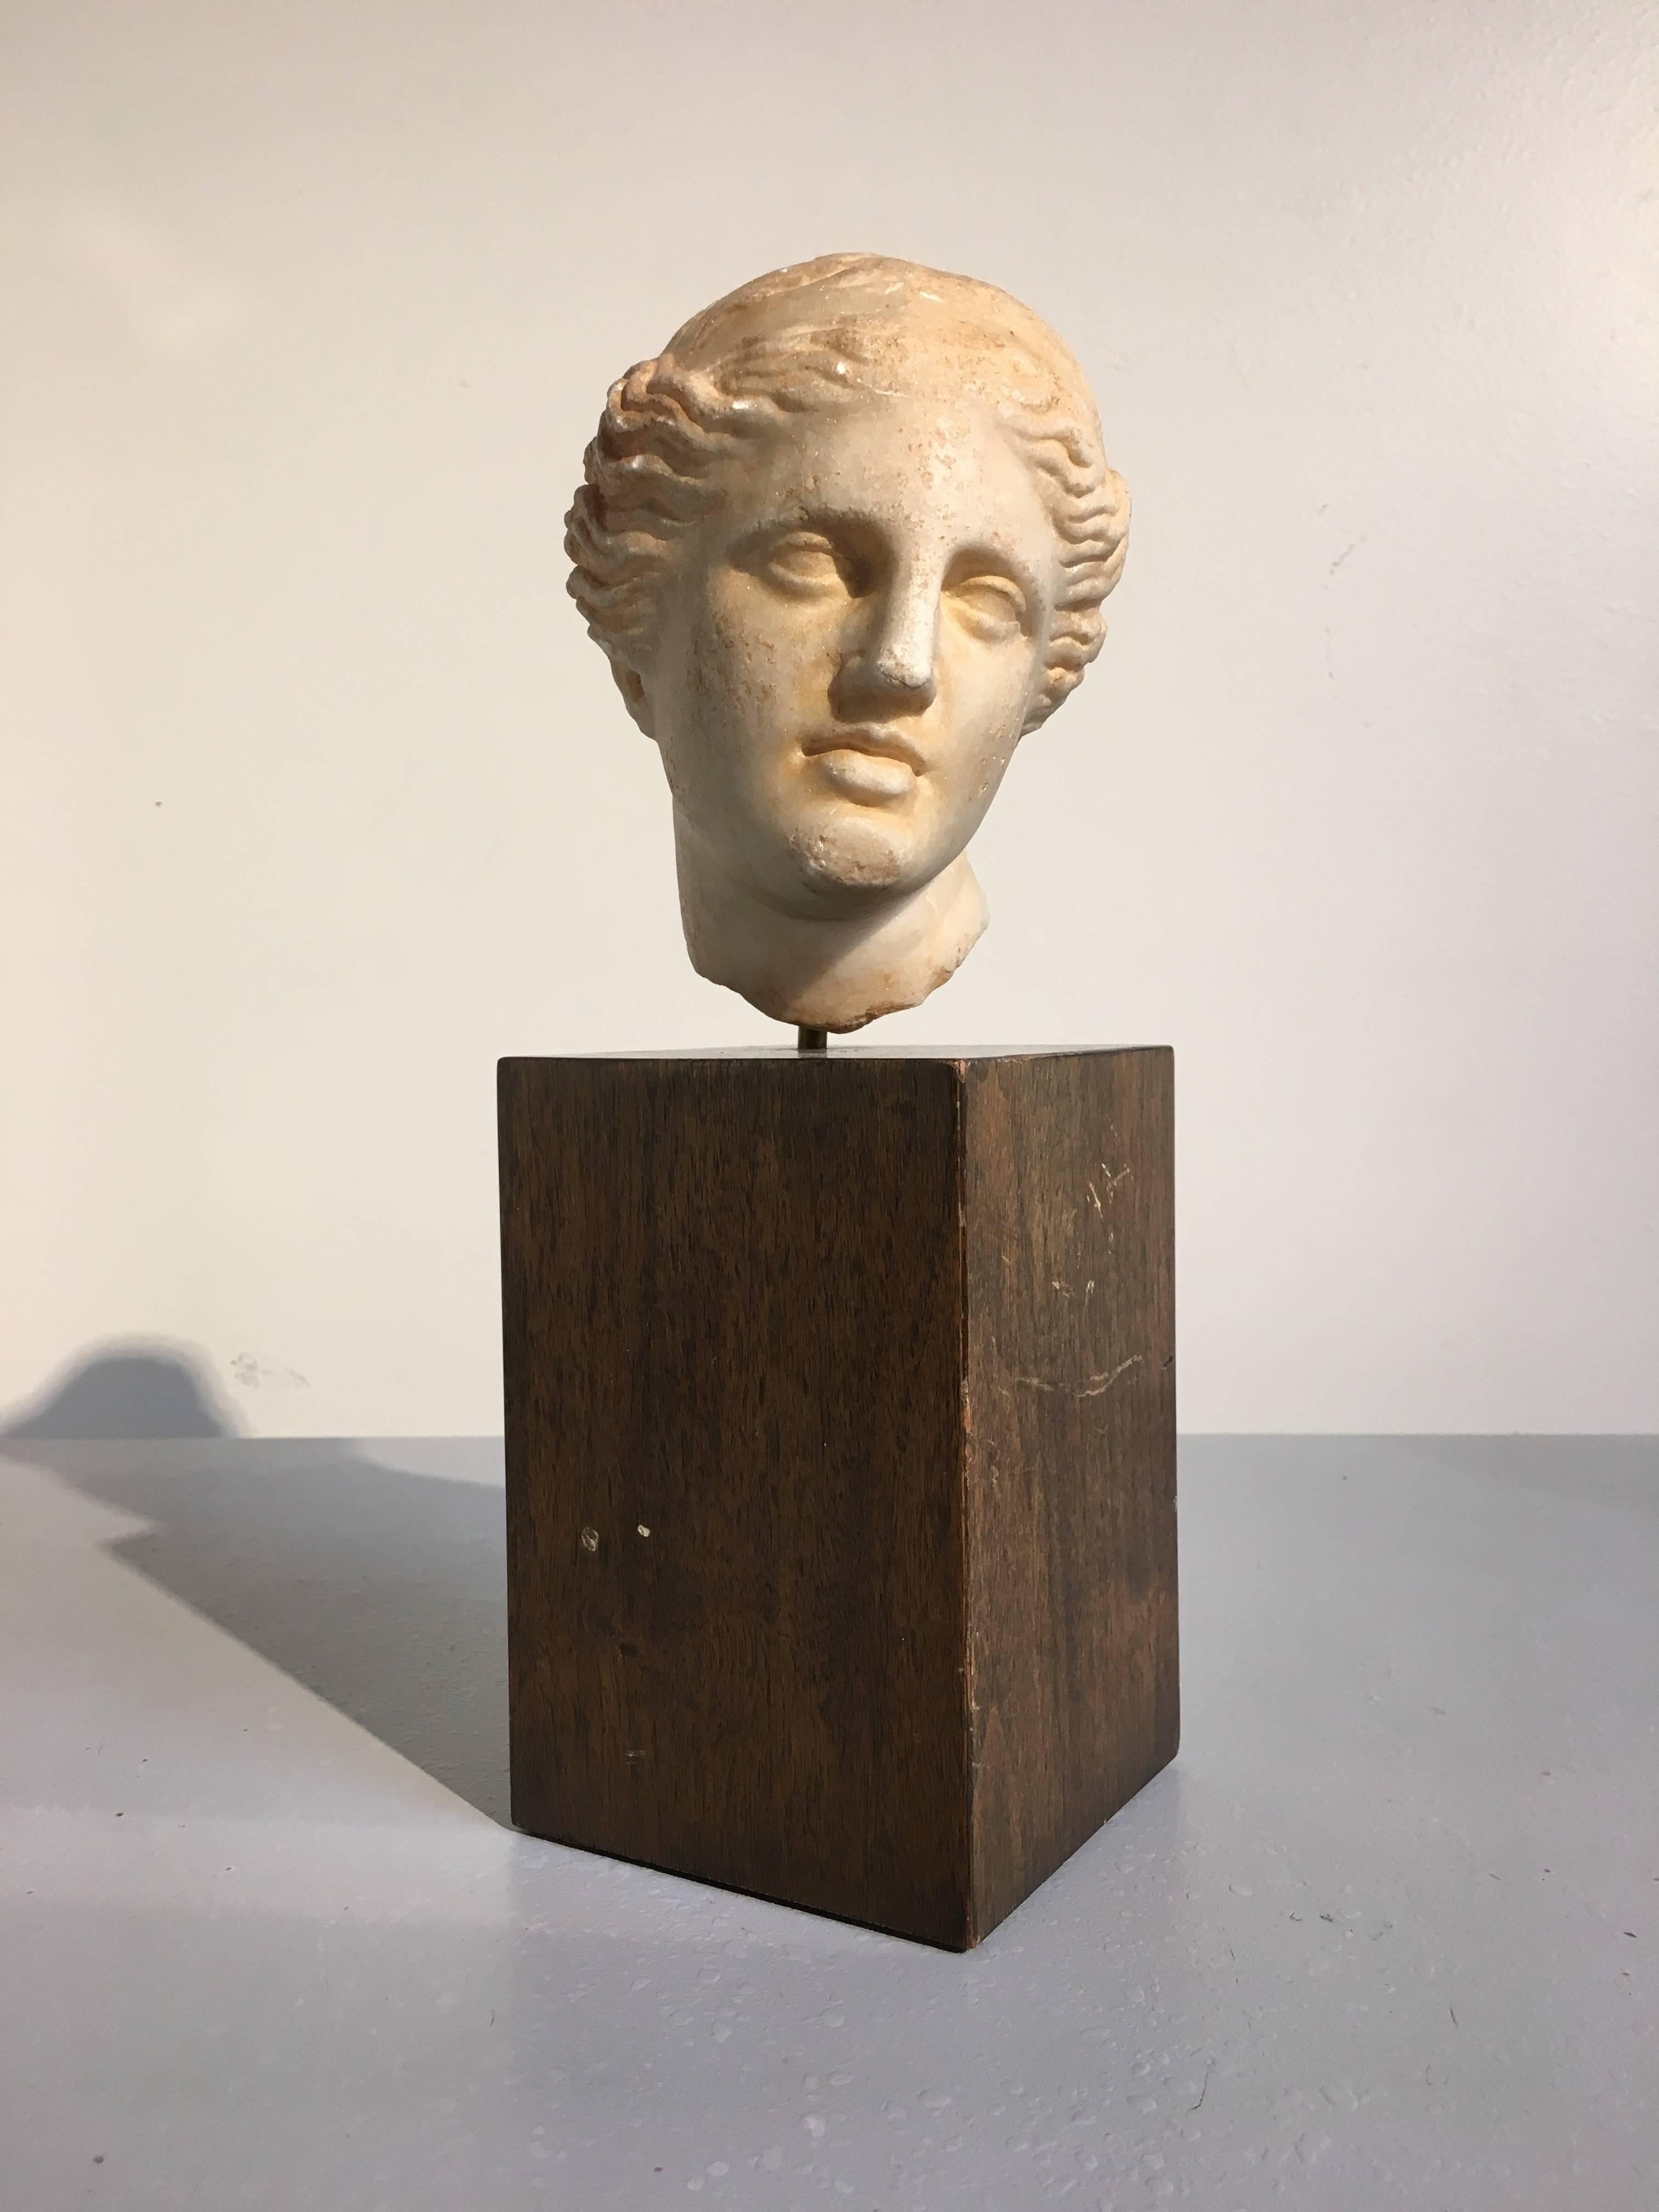 A finely carved Italian Grand Tour marble head of Apollo, after the antique, 19th century. The god of light and culture has been carved sensitively with fine features under a head of wavy hair secured by a simple fillet. 
Mounted on a custom